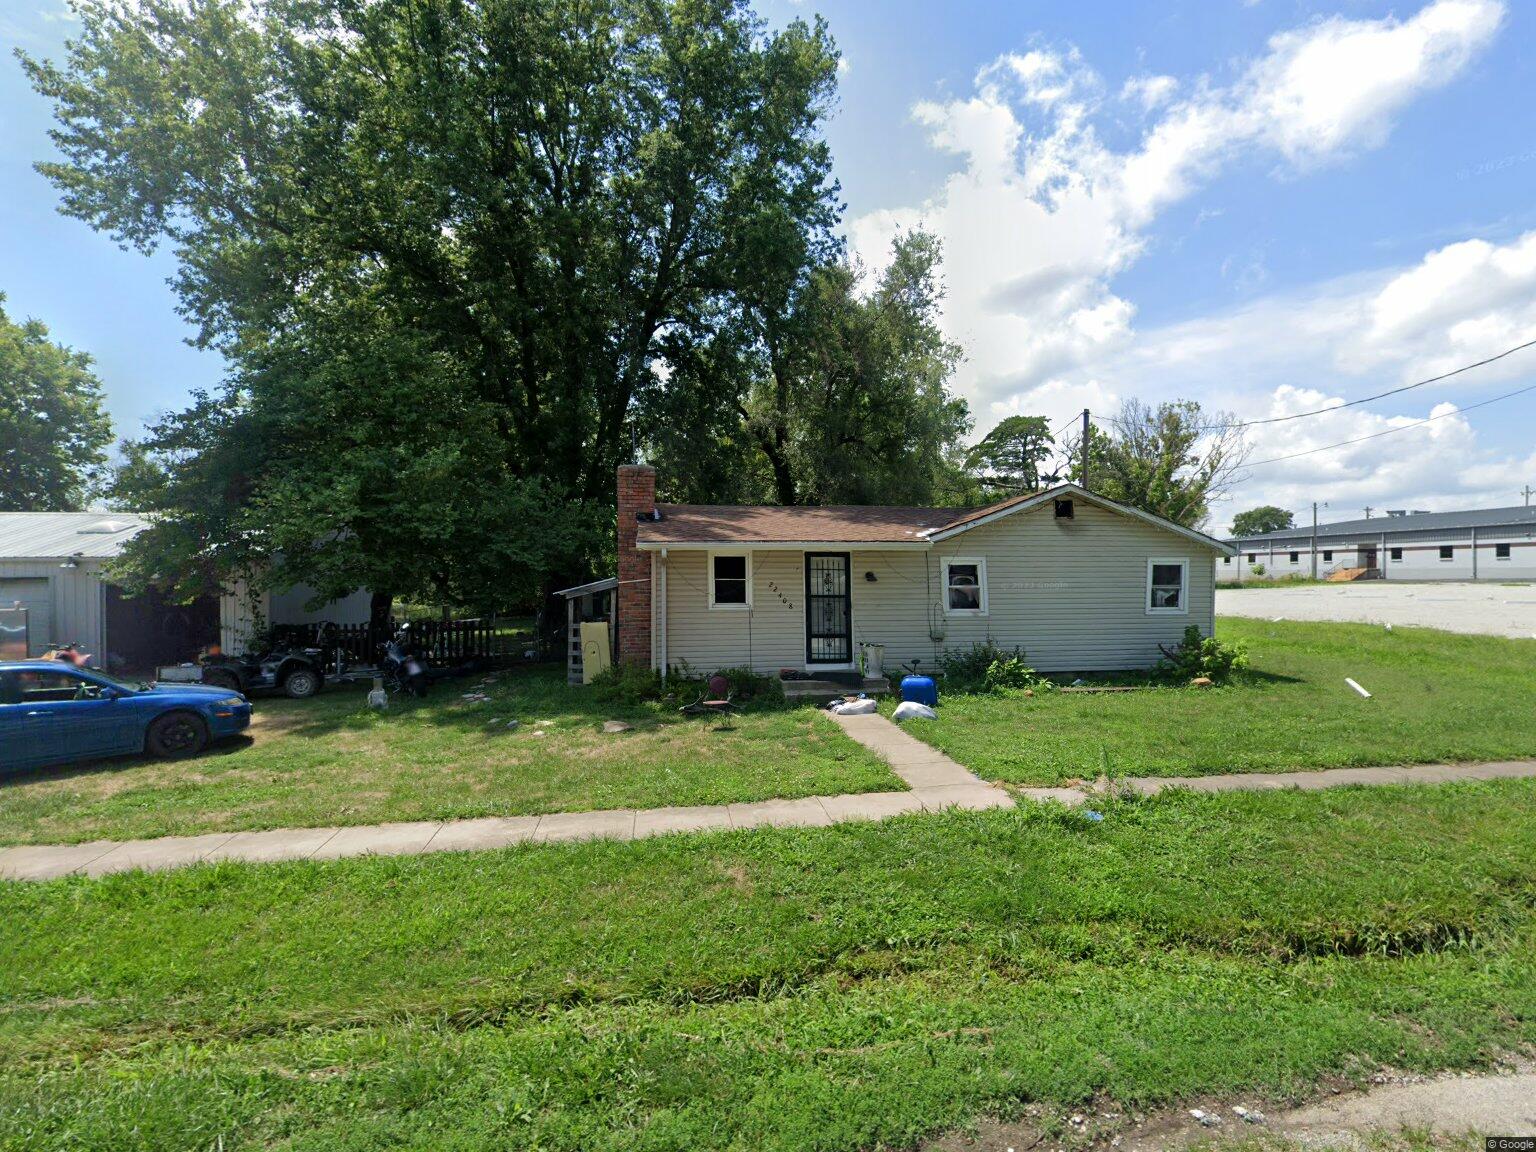 22408 Center St, Weaubleau MO Pre-foreclosure Property